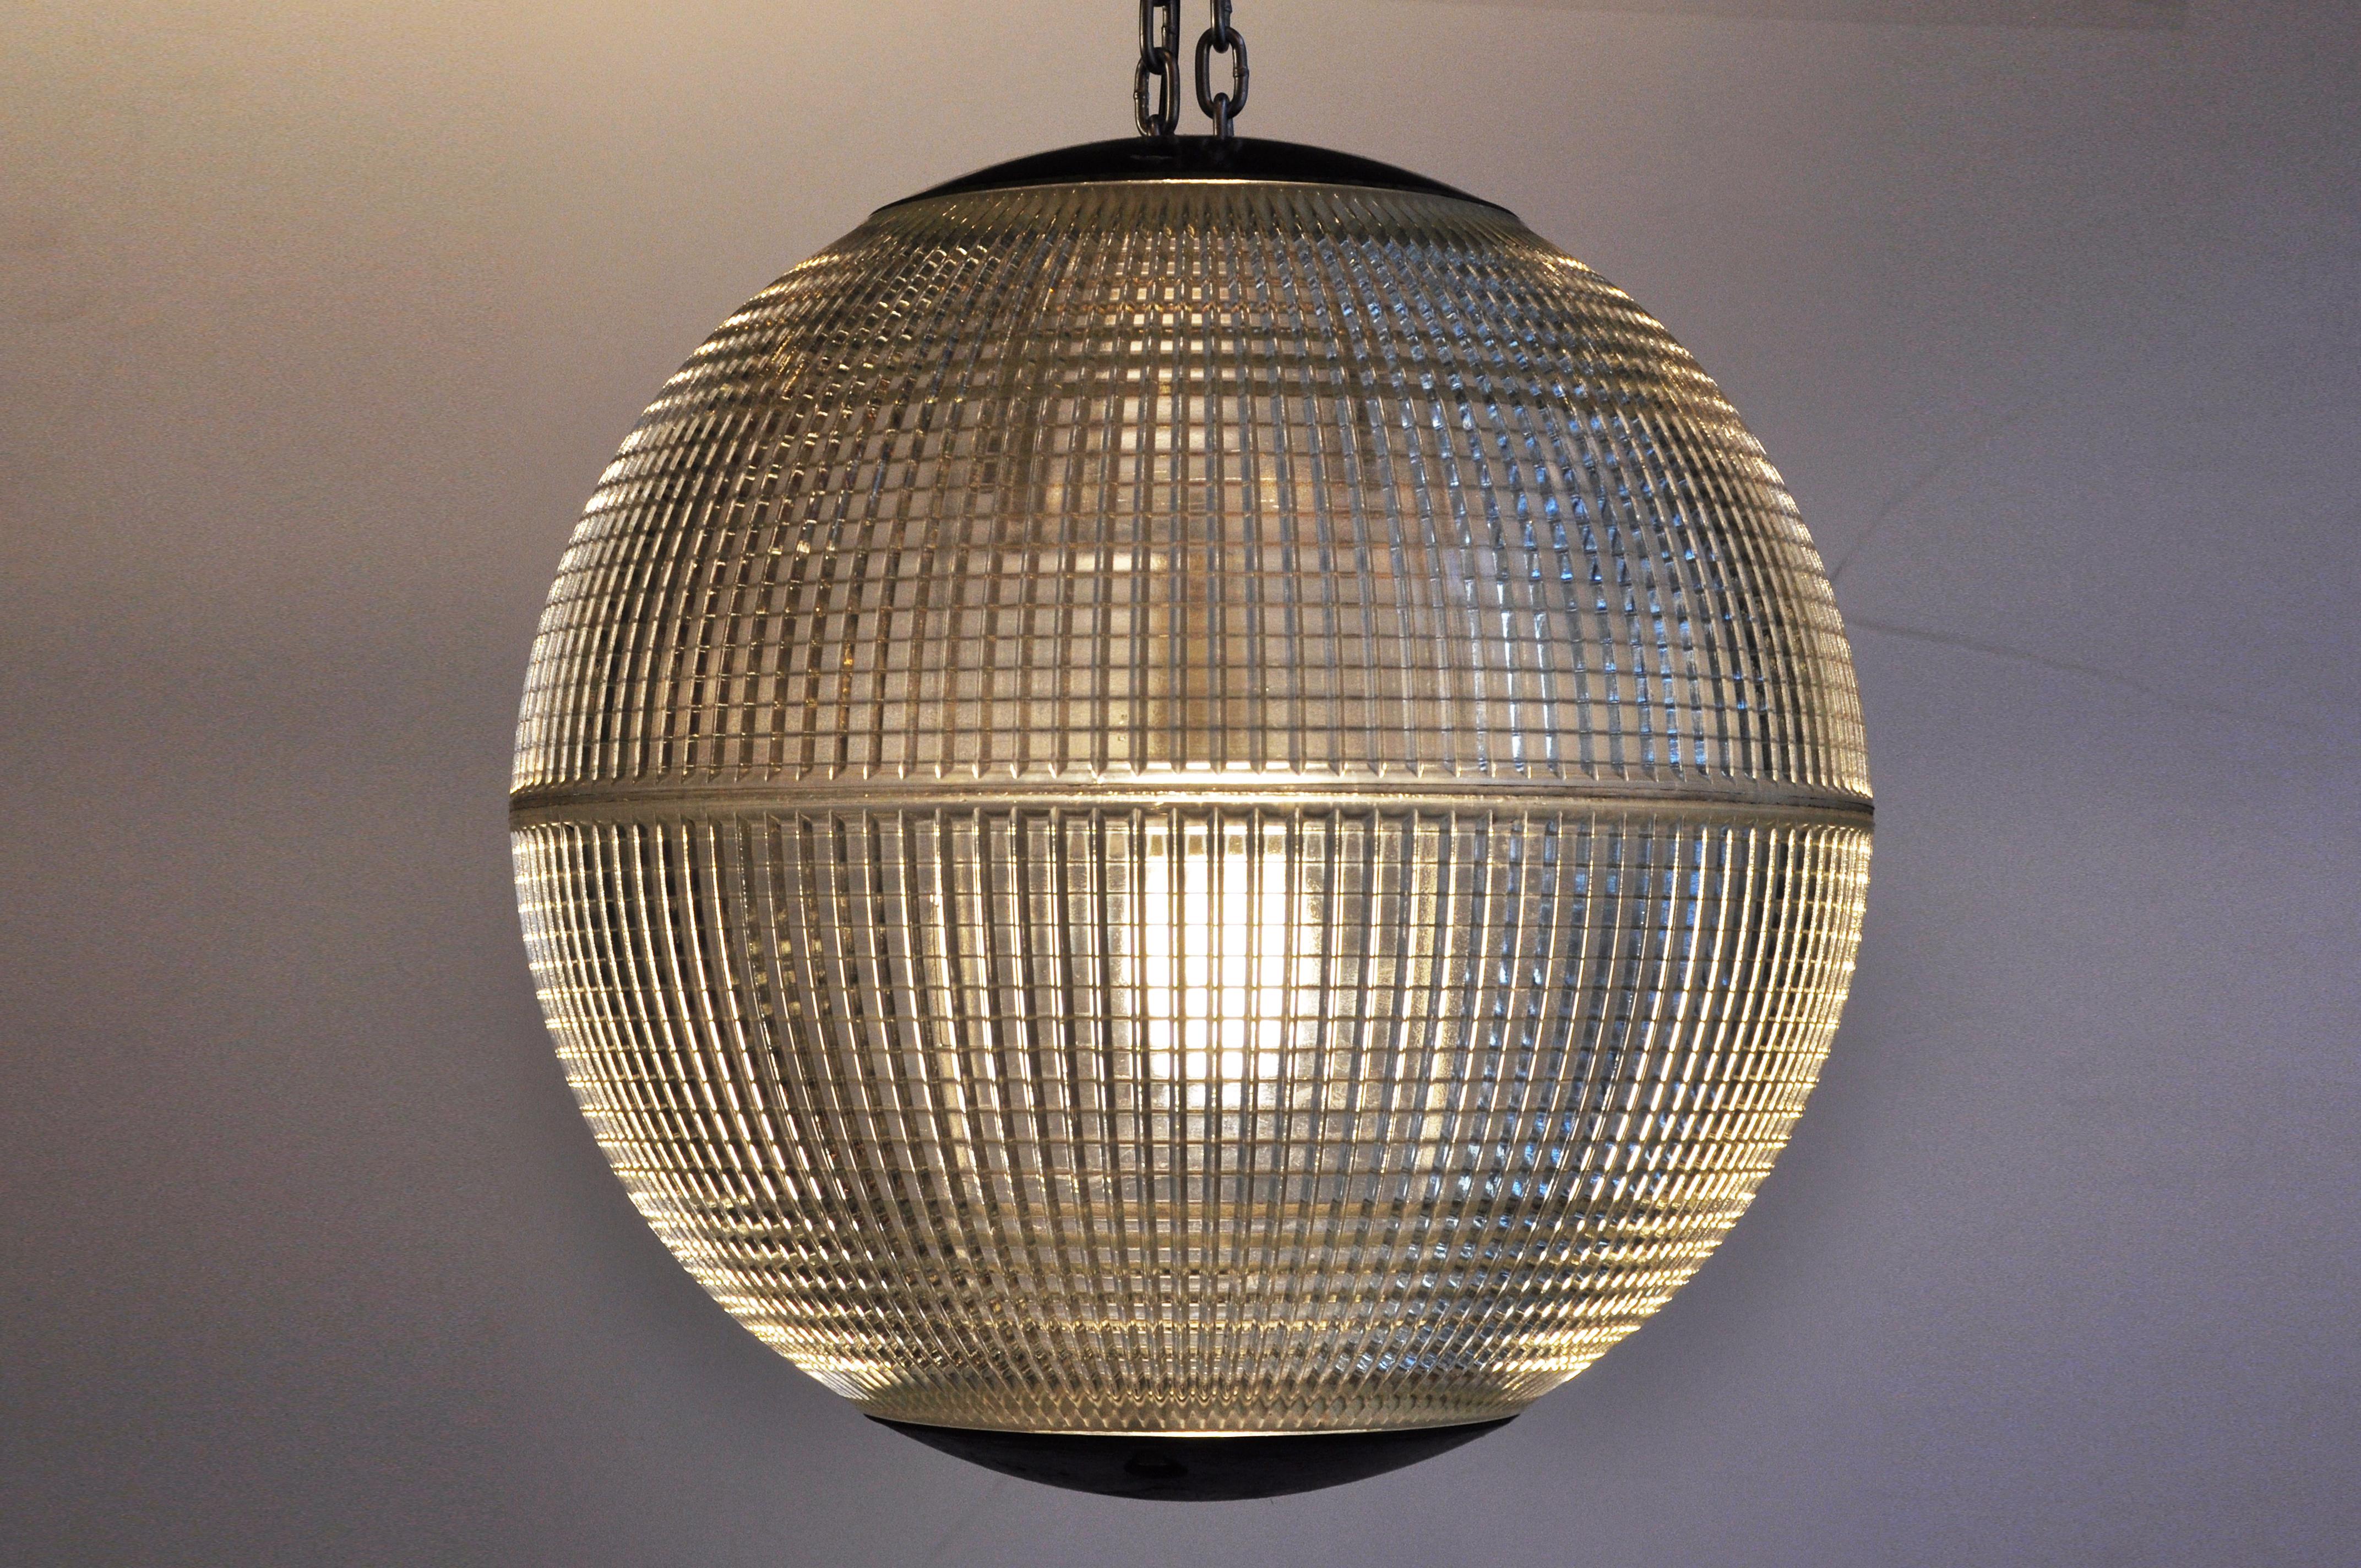 These iconic spheres once lighted the thoroughfares of Paris. Since being removed from their lampposts, these industrial globes have been rewired for modern, indoor use. They display handsomely, making a statement individually as a table or floor